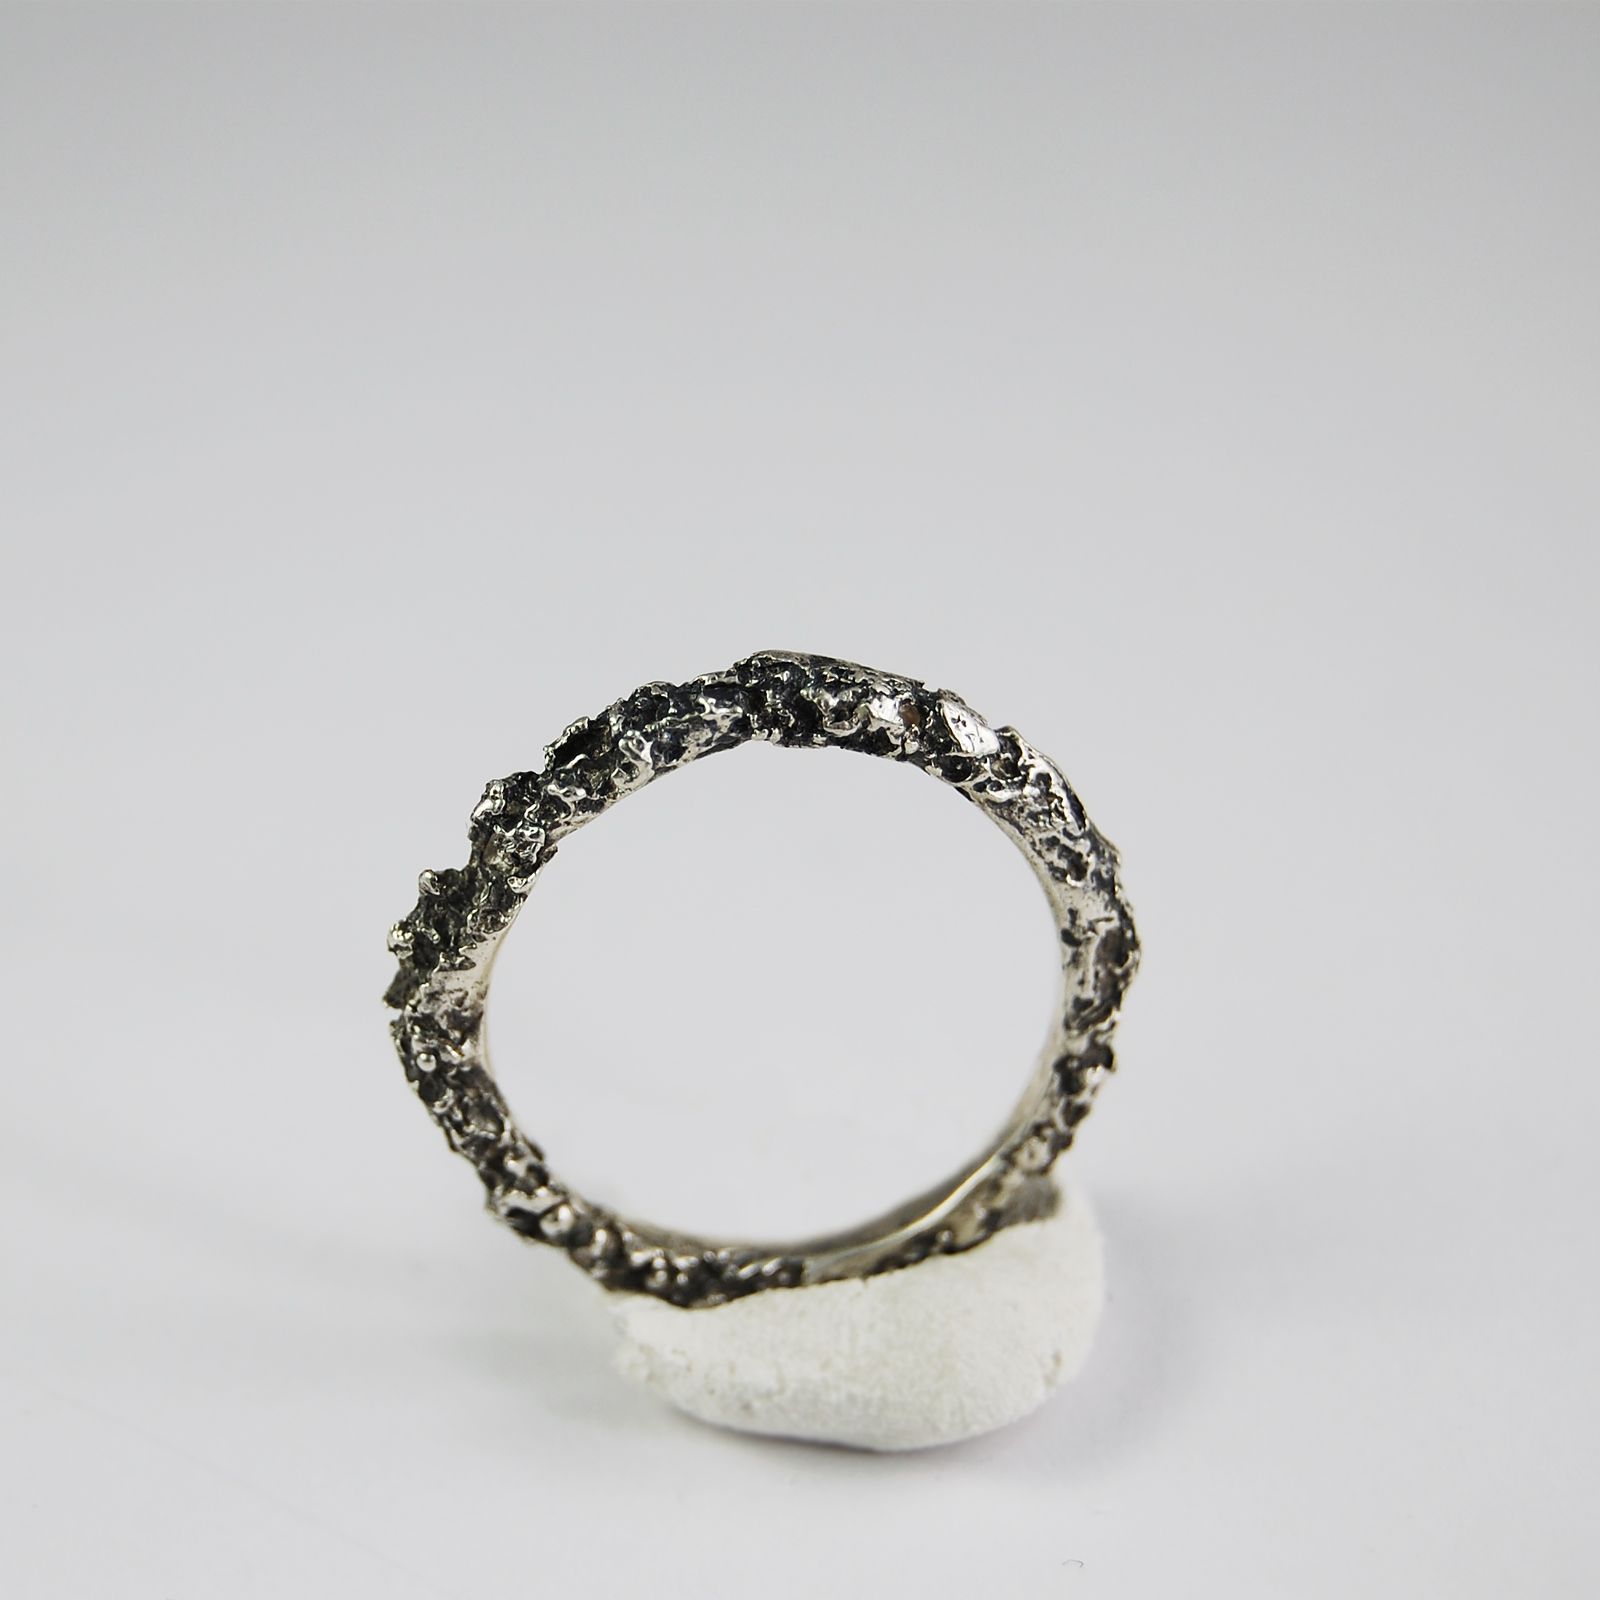 50pcs tibetan silver color round knitted texture ring frame design h1582